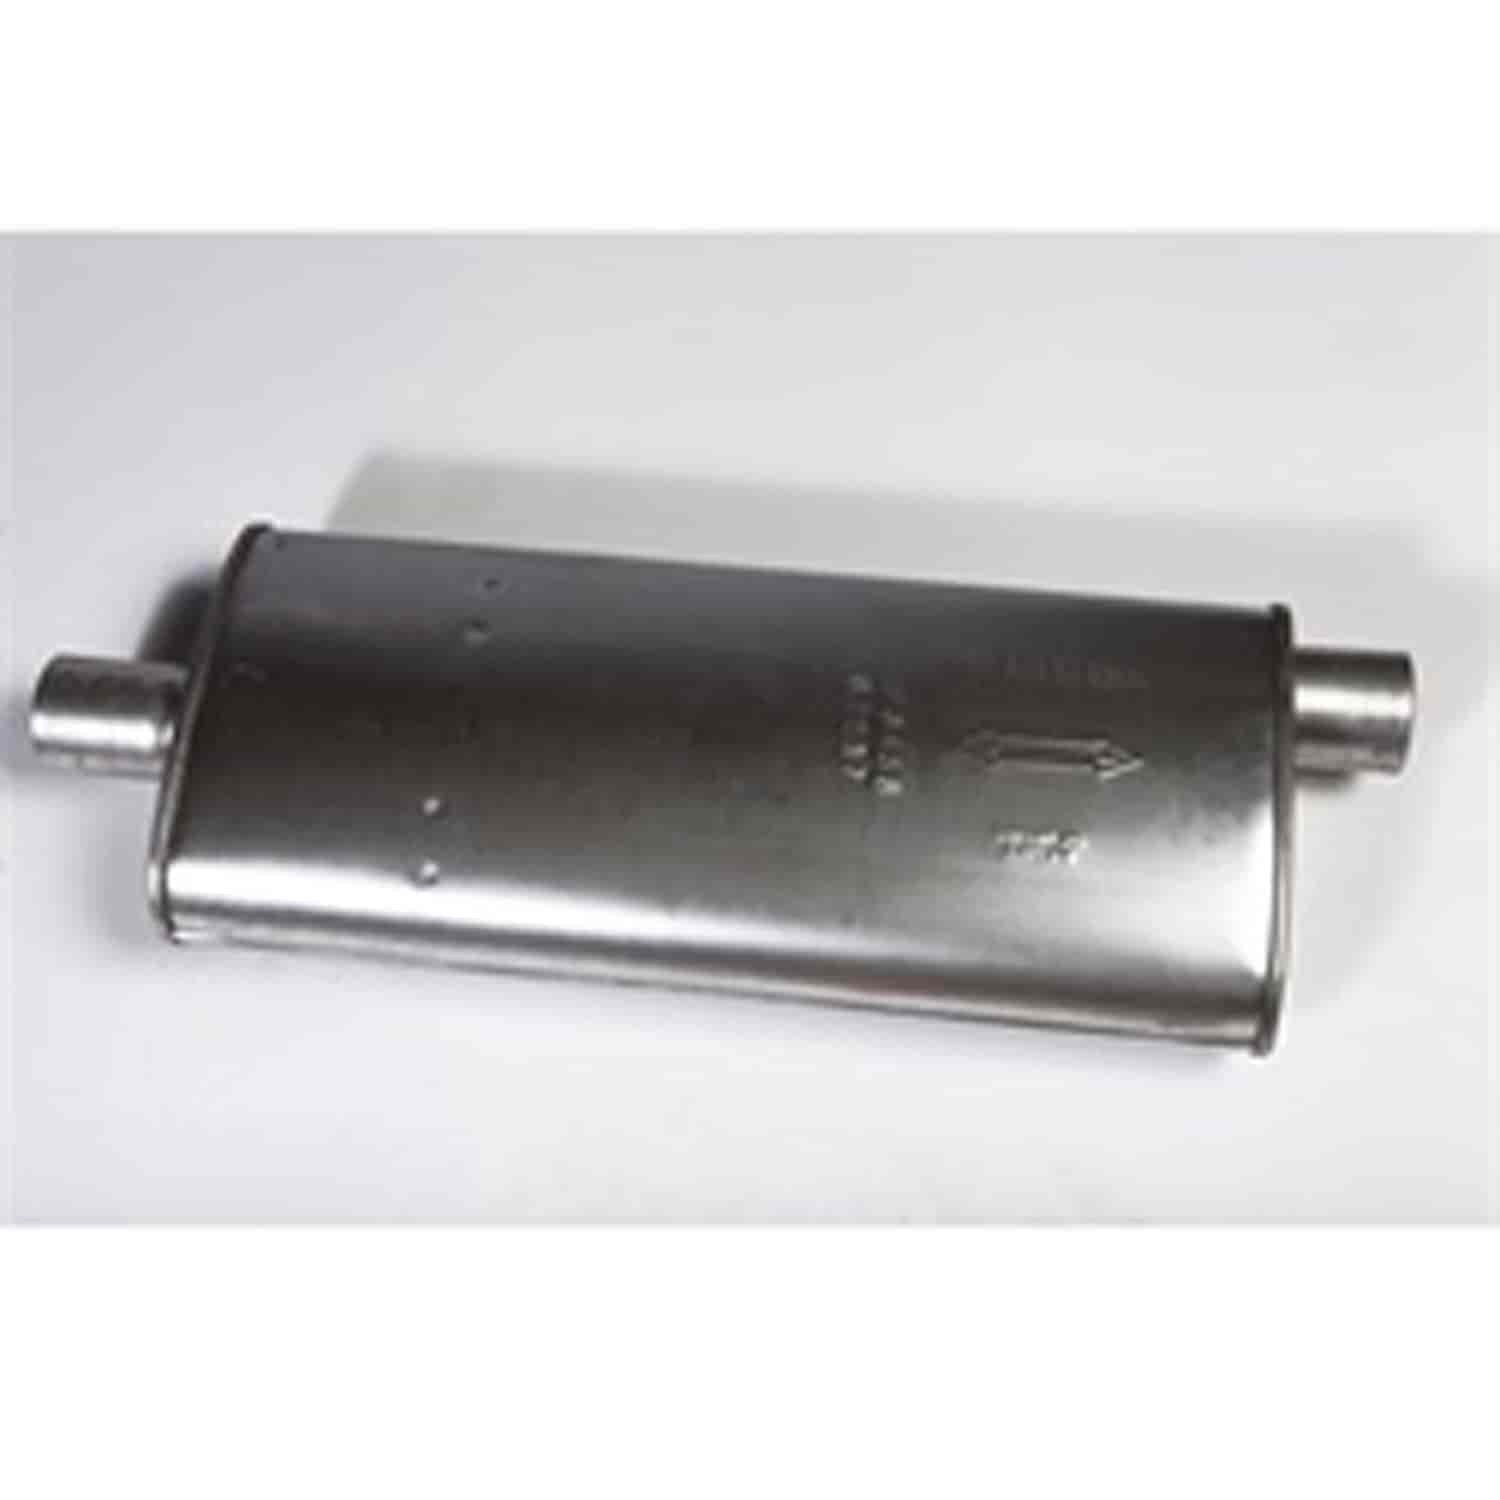 Replacement muffler from Omix-ADA, Fits 81-83 Jeep SJ Cherokees and 84-91 Grand Wagoneers with a 360 cubic inch V8 engine.